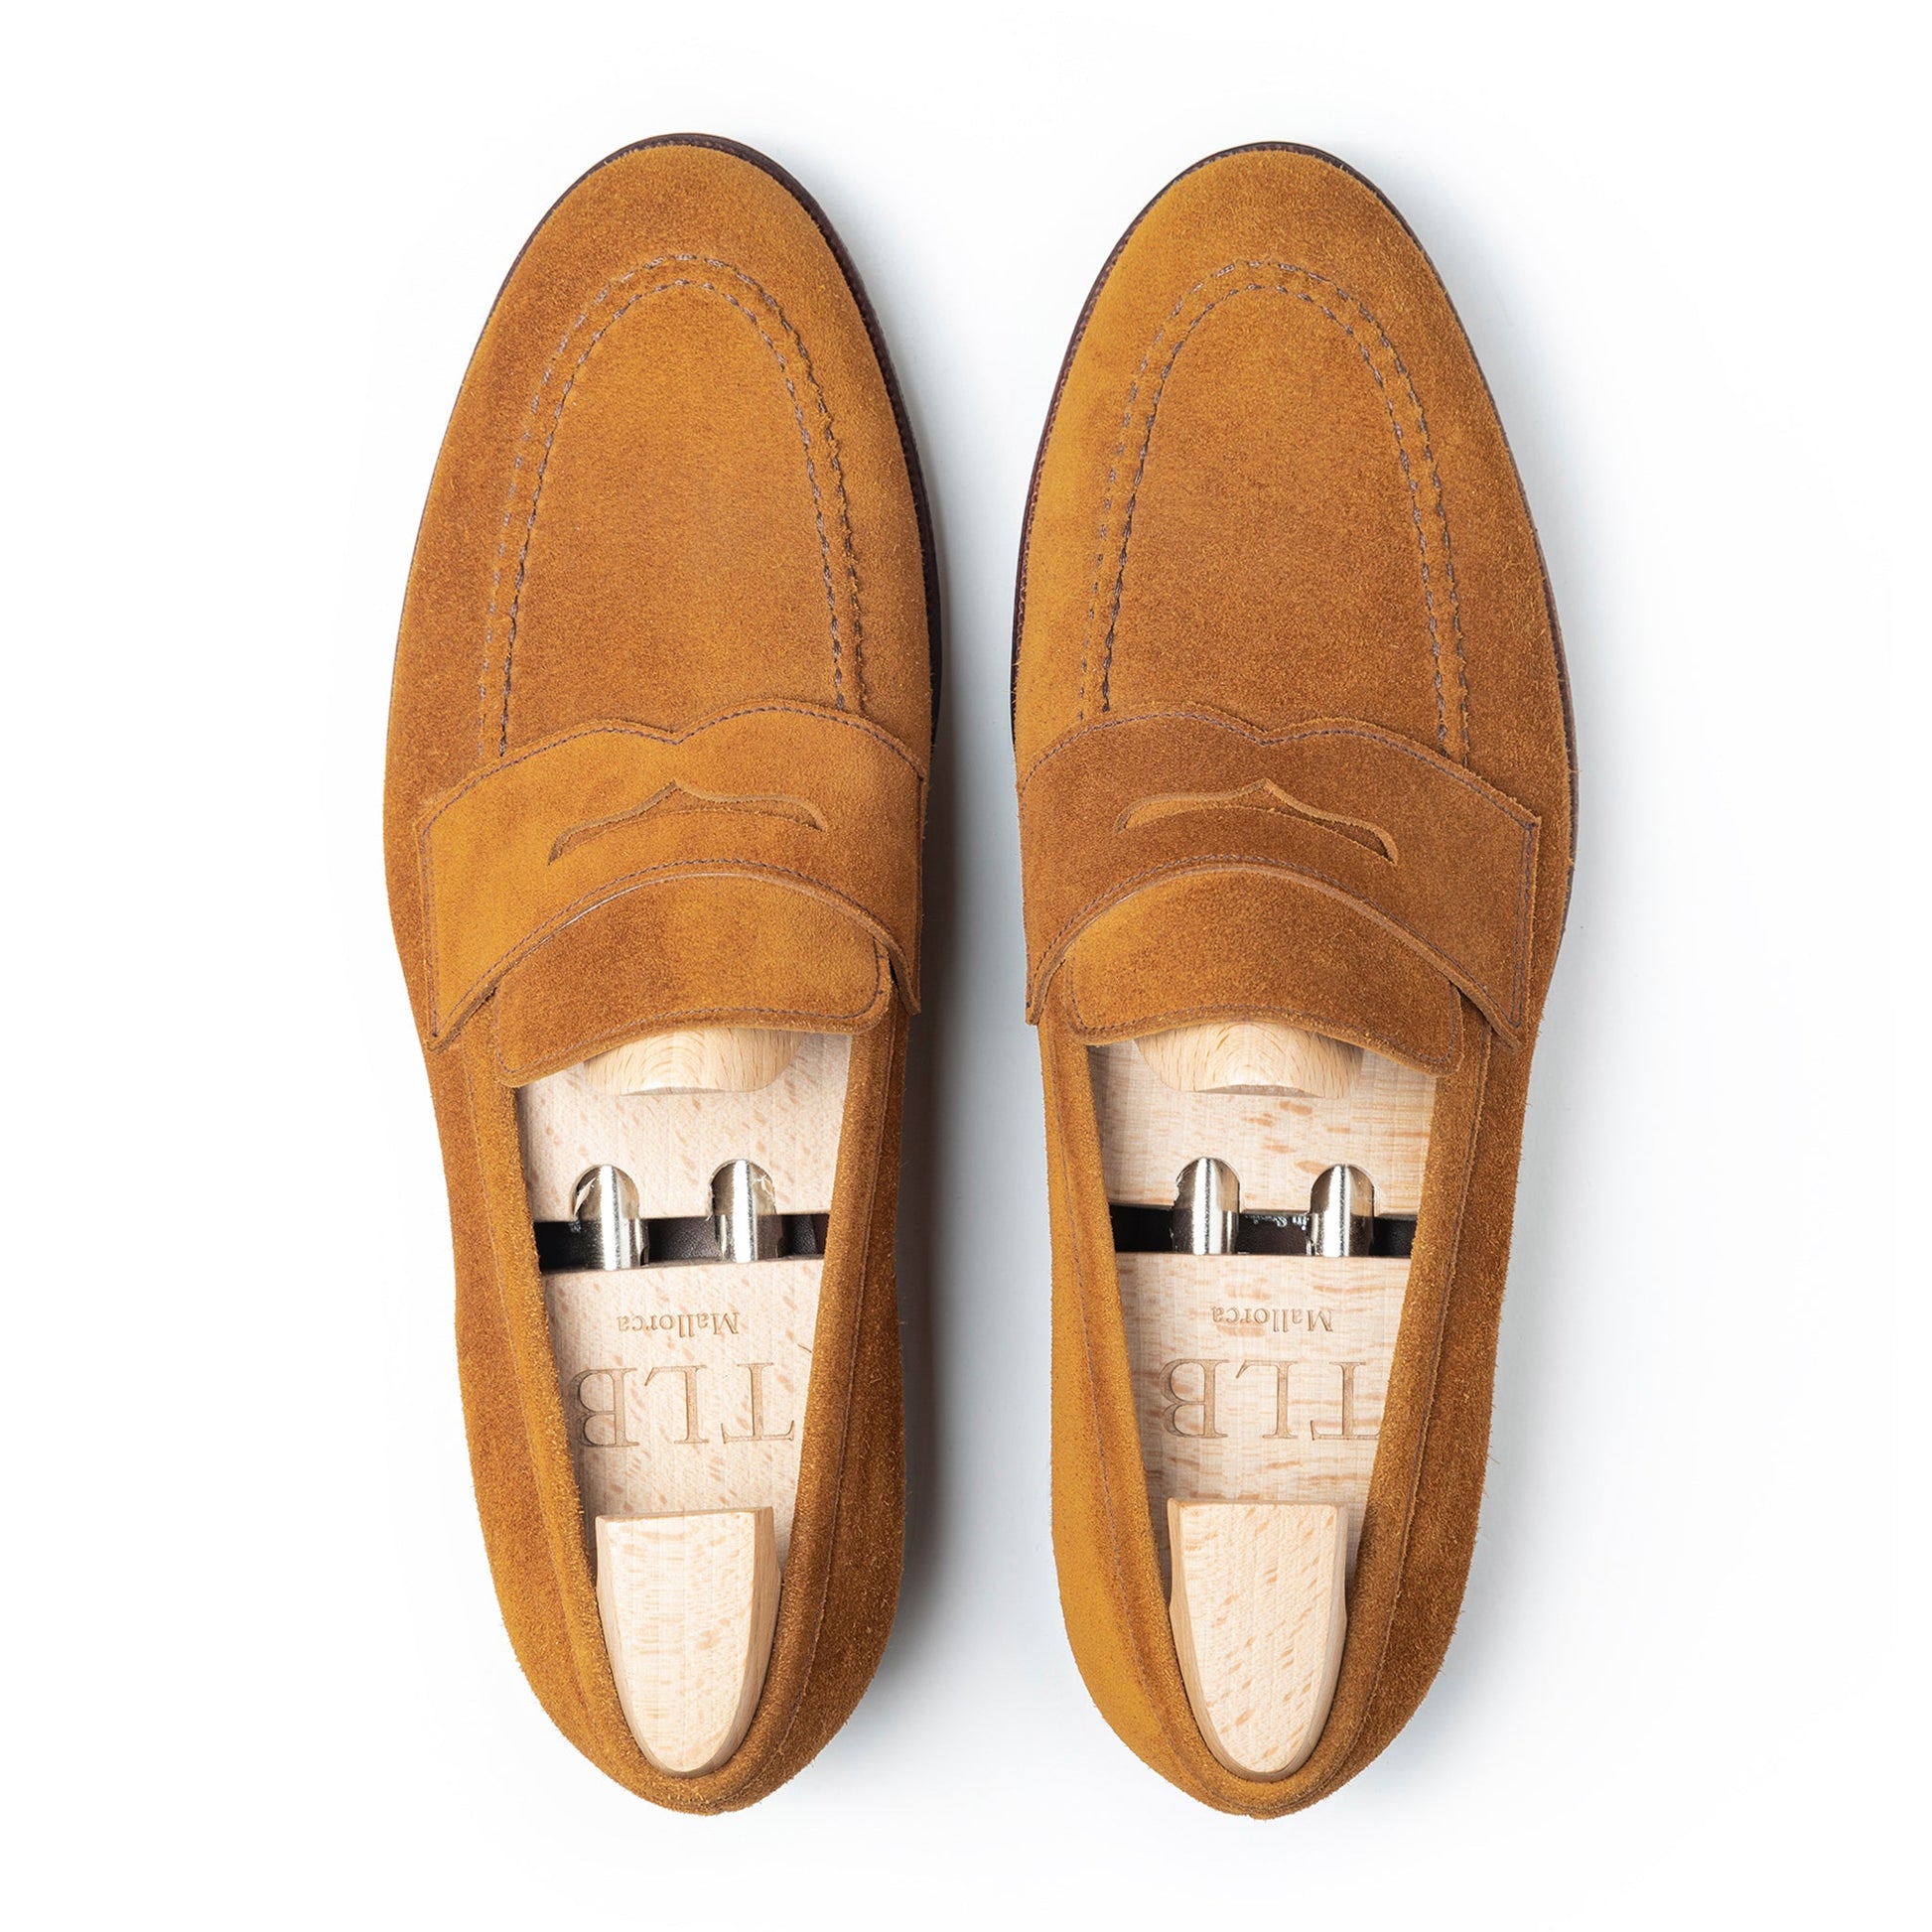 TLB Mallorca leather shoes - Men's suede loafers 